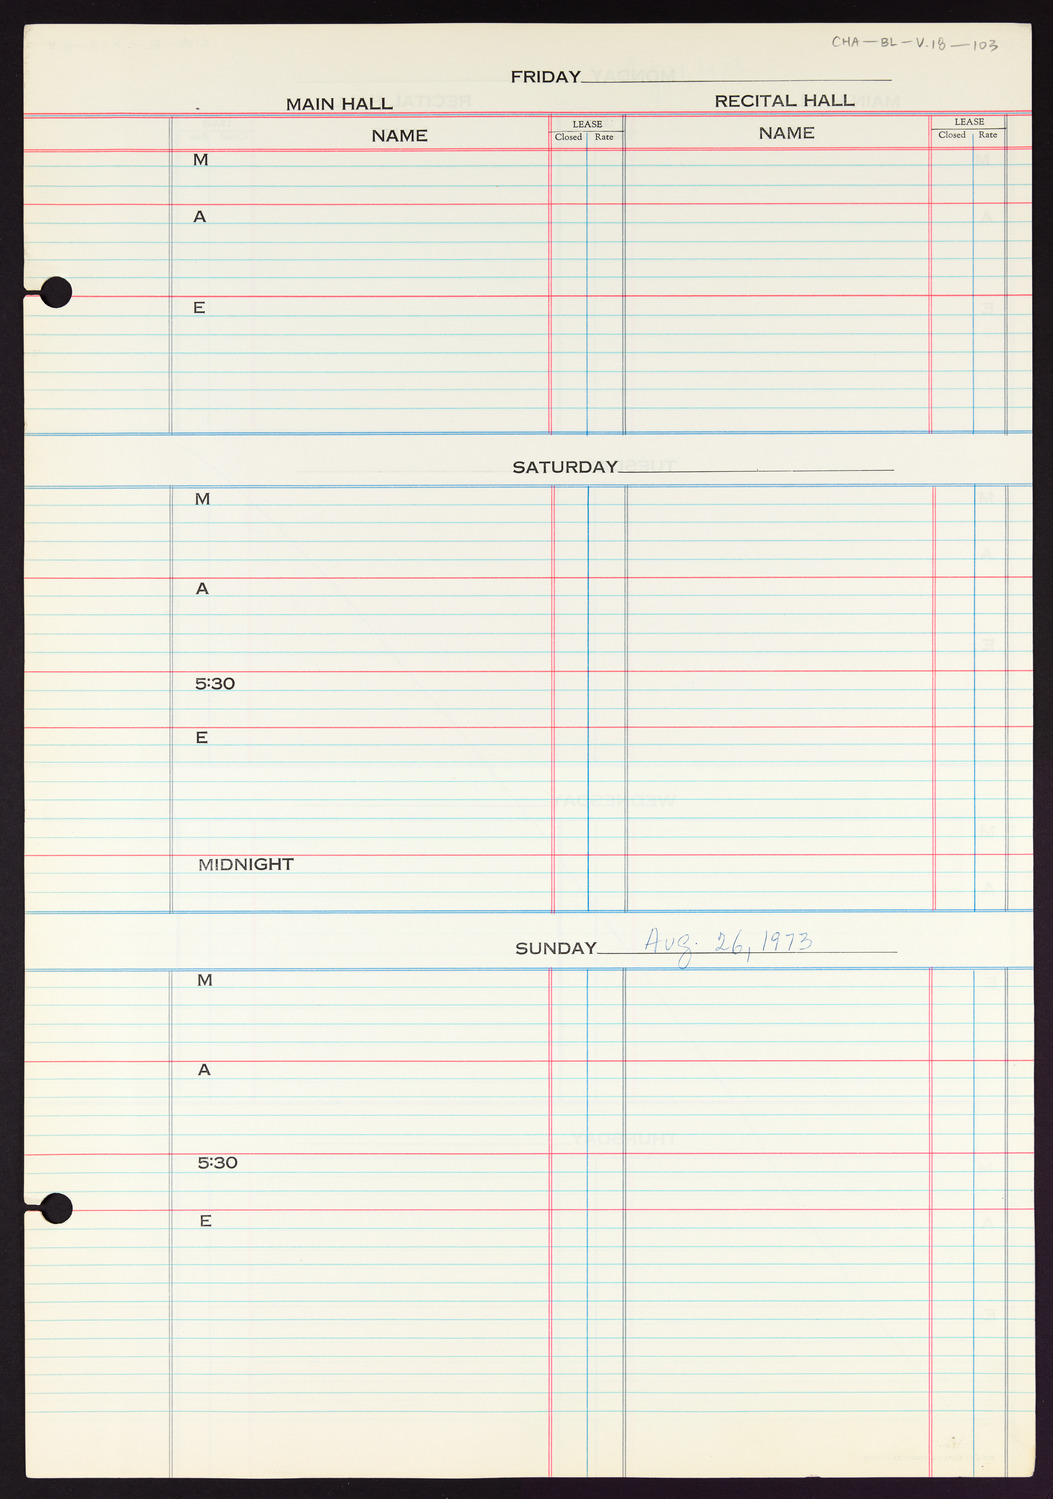 Carnegie Hall Booking Ledger, volume 18, page 103